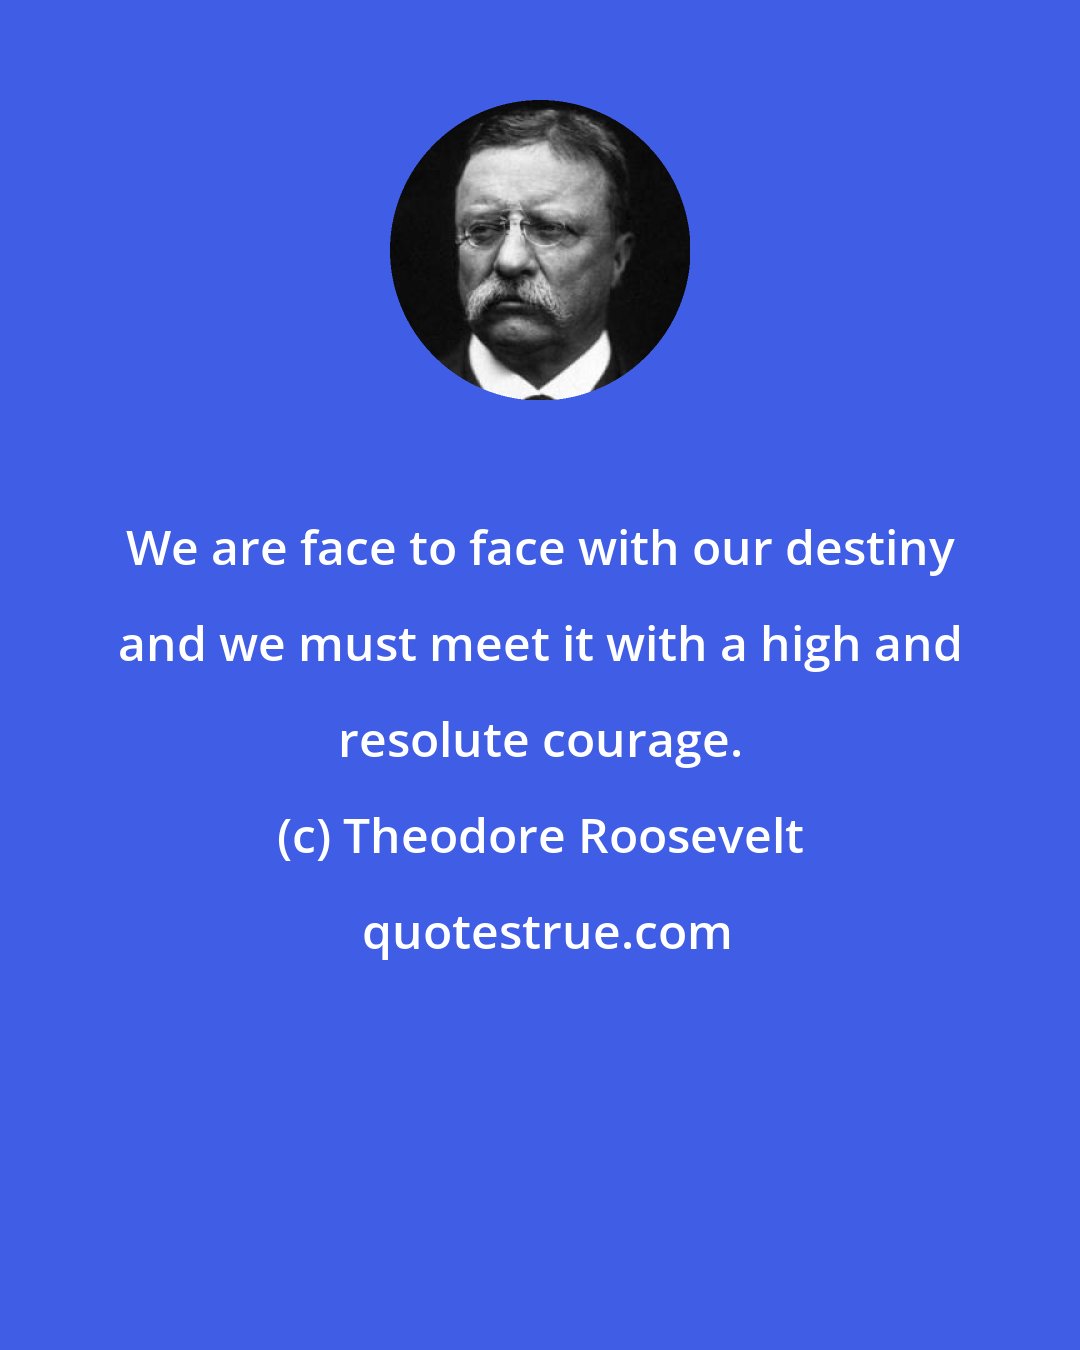 Theodore Roosevelt: We are face to face with our destiny and we must meet it with a high and resolute courage.